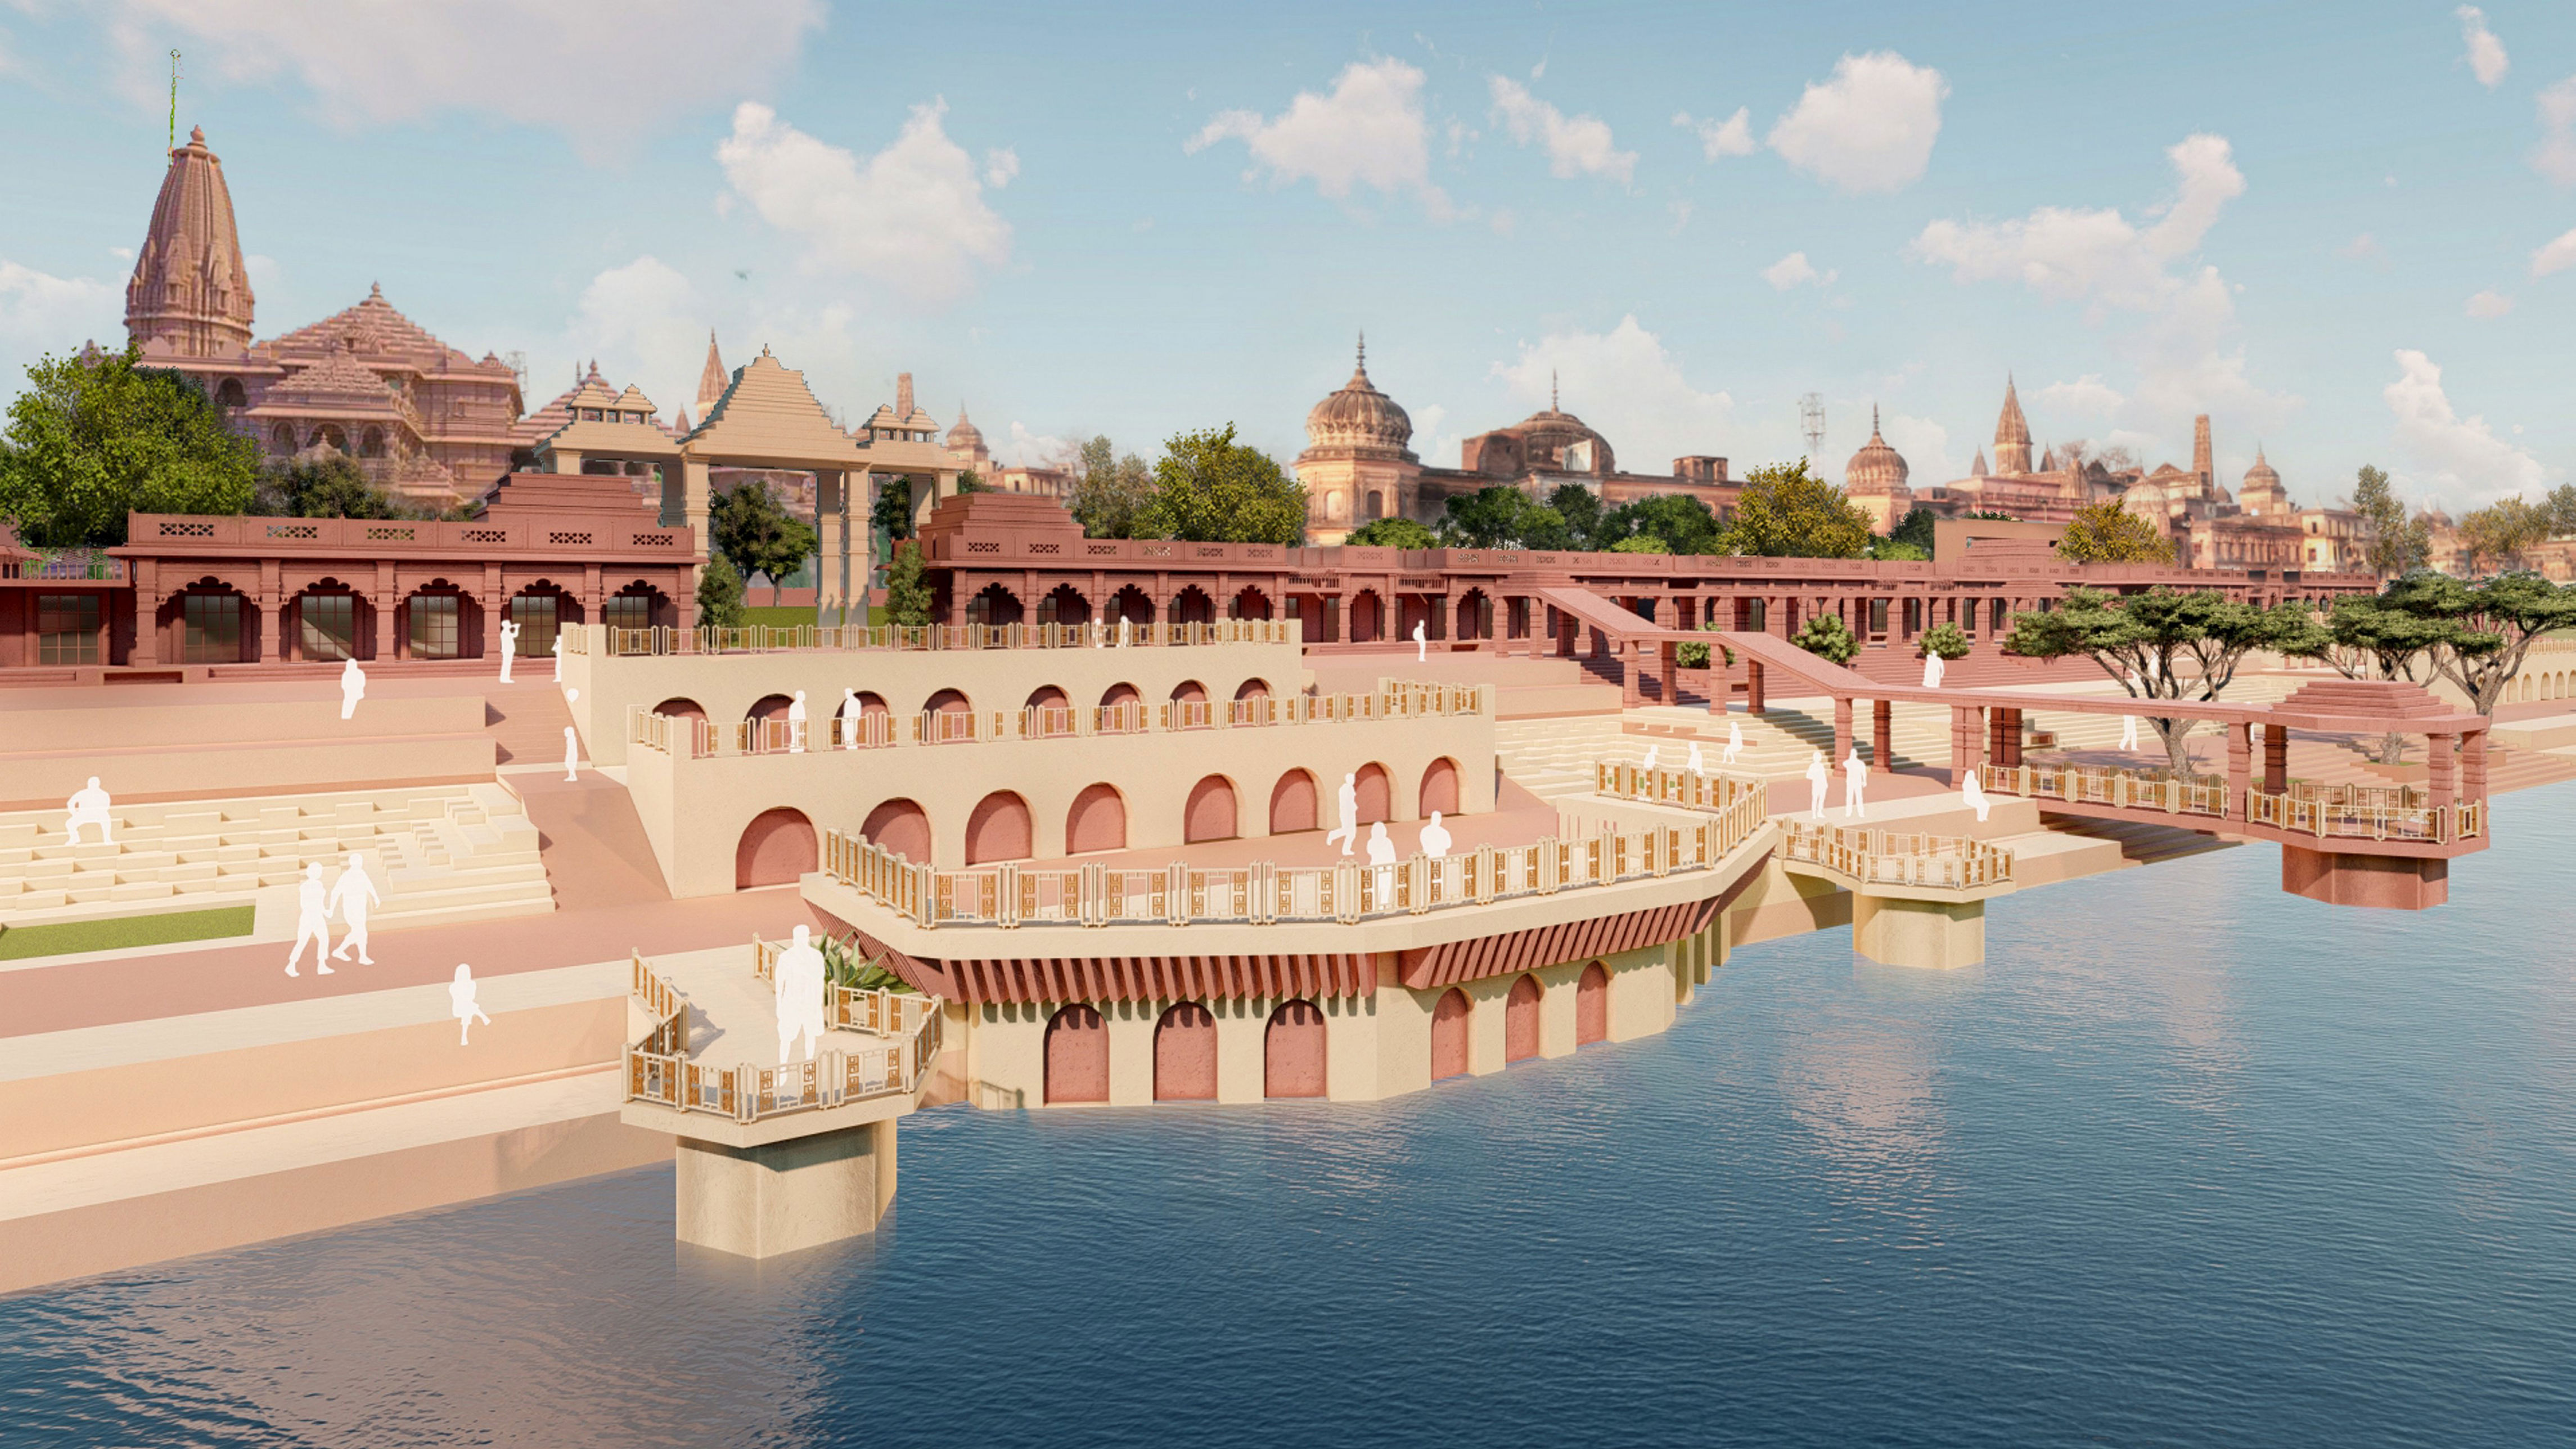 'ramayana spiritual forest' to come up on sarayu river bank in ayodhya, tell tale of ram's exile period